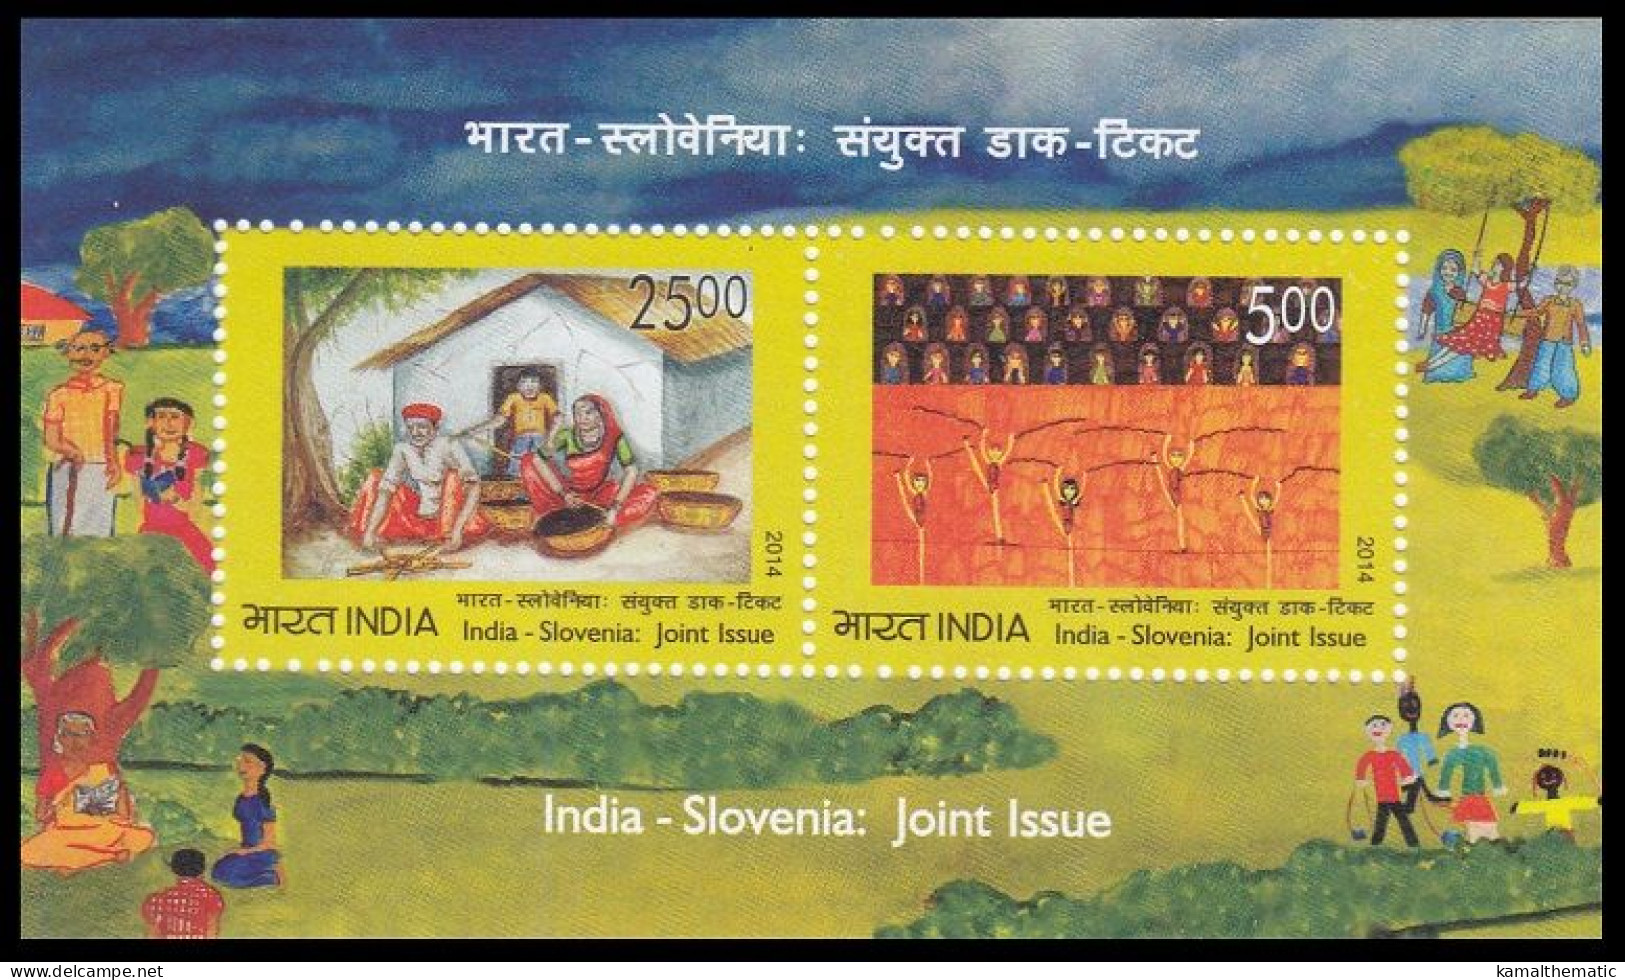 India 15 different Joint Issues of India MNH Miniature Sheets lot